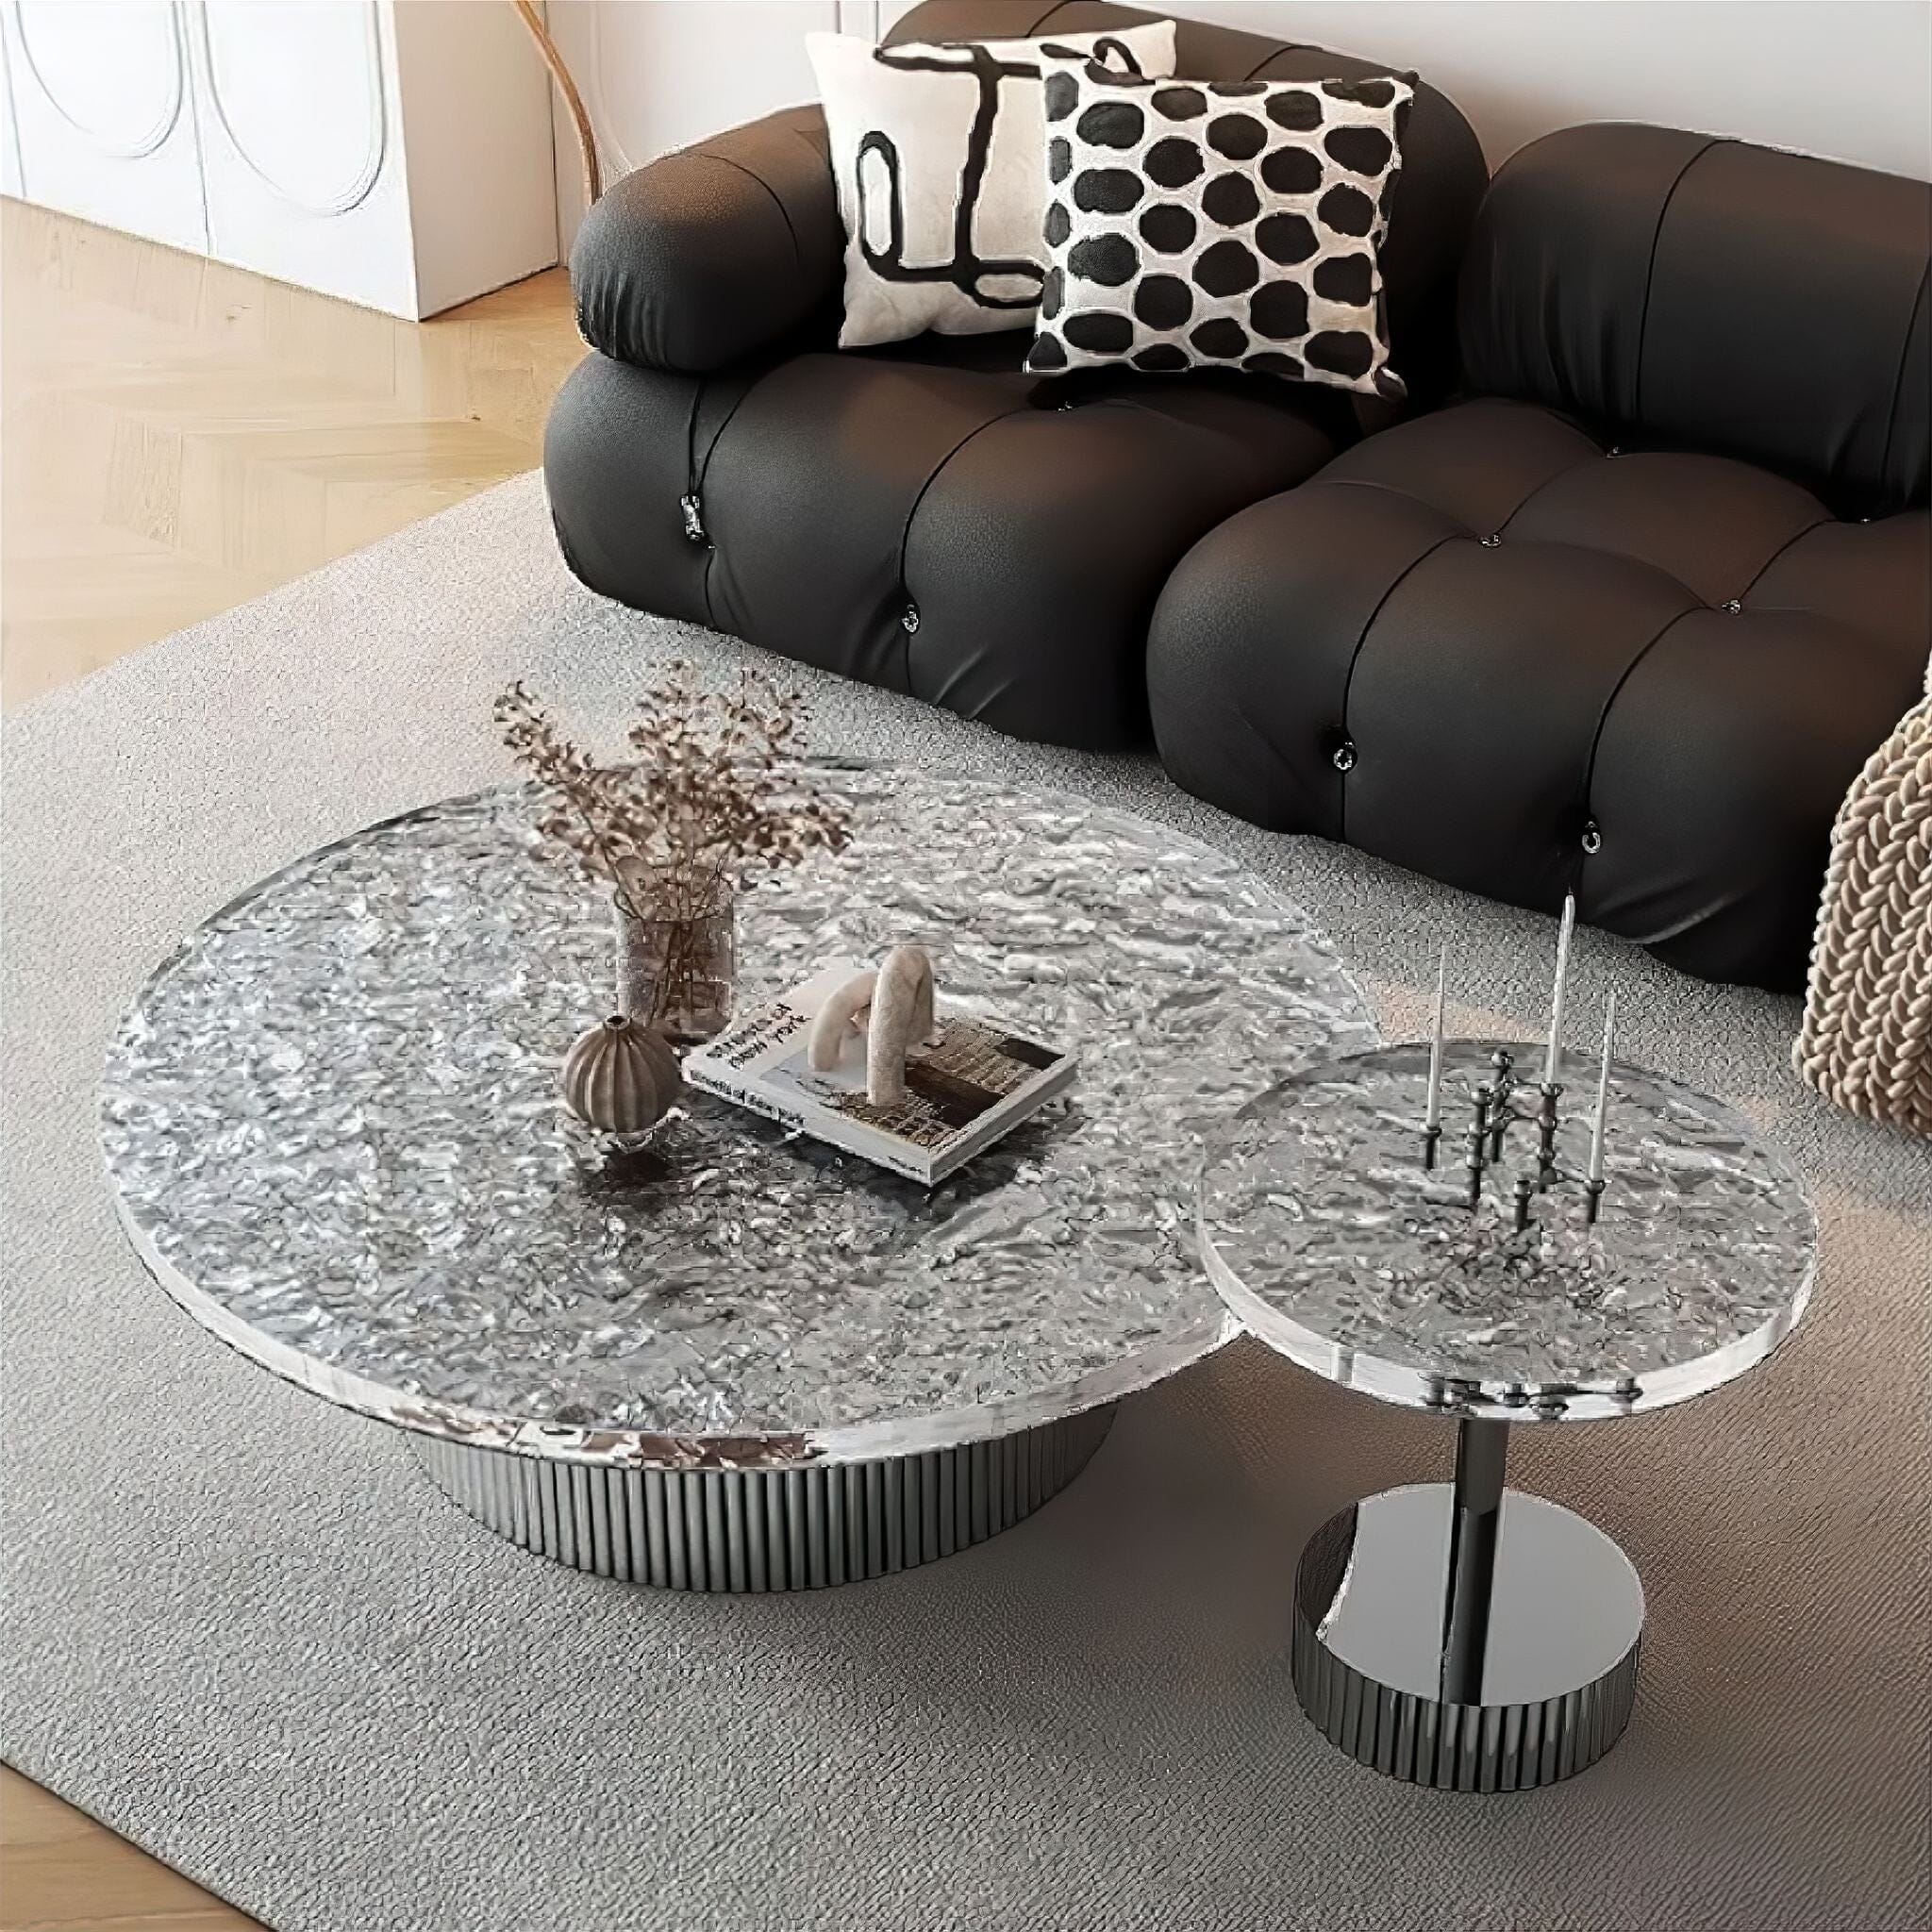 Amorette Coffee Table Collection Coffee Table 